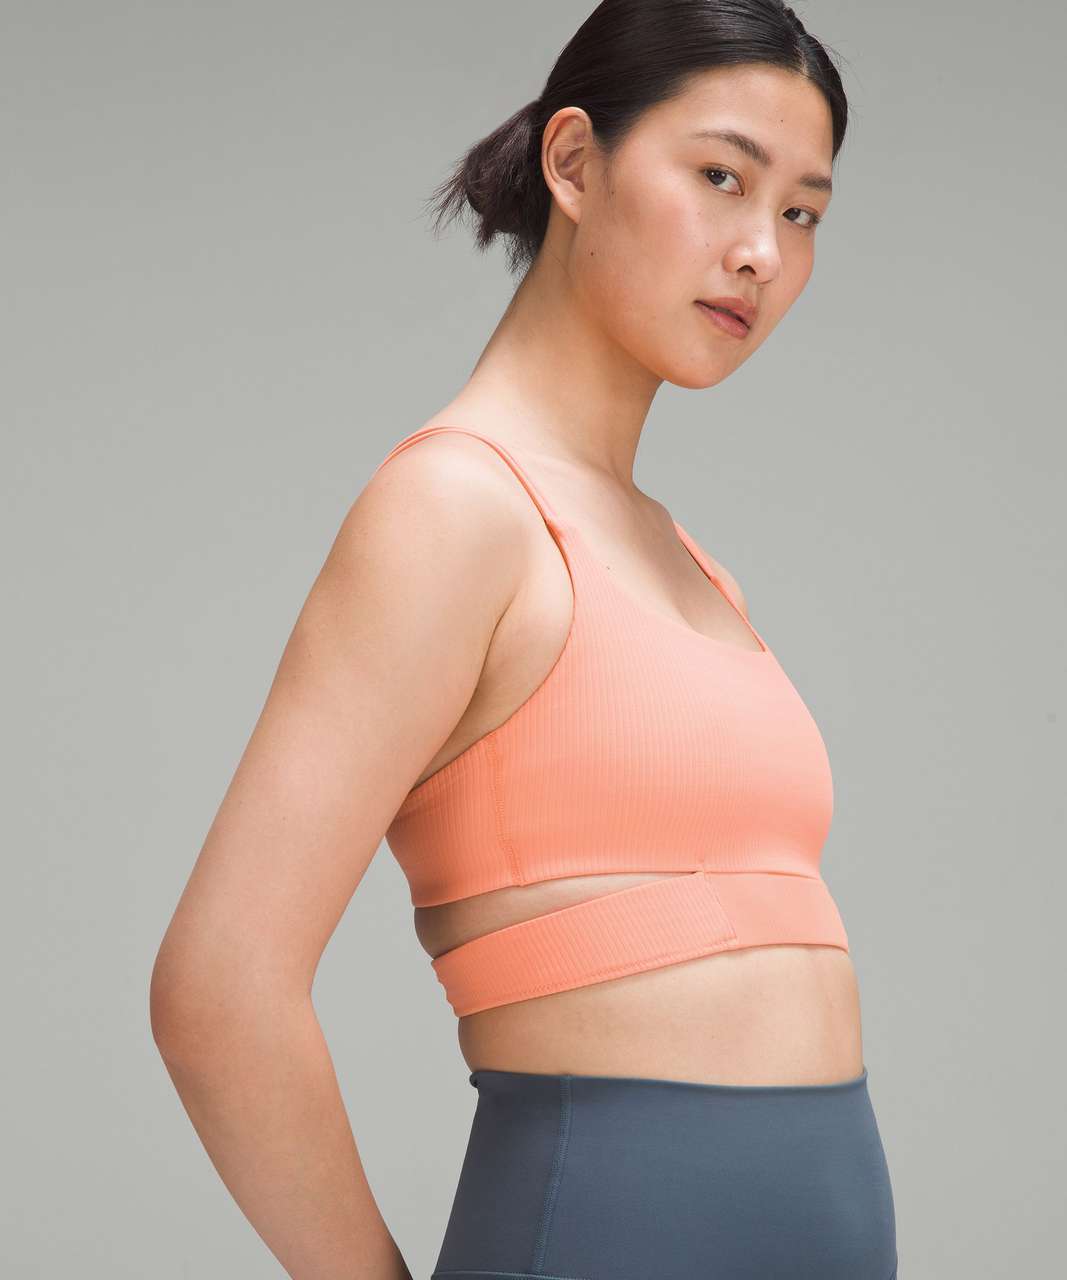 Ribbed Nulu Strappy Yoga Bra *Light Support, A/B Cup